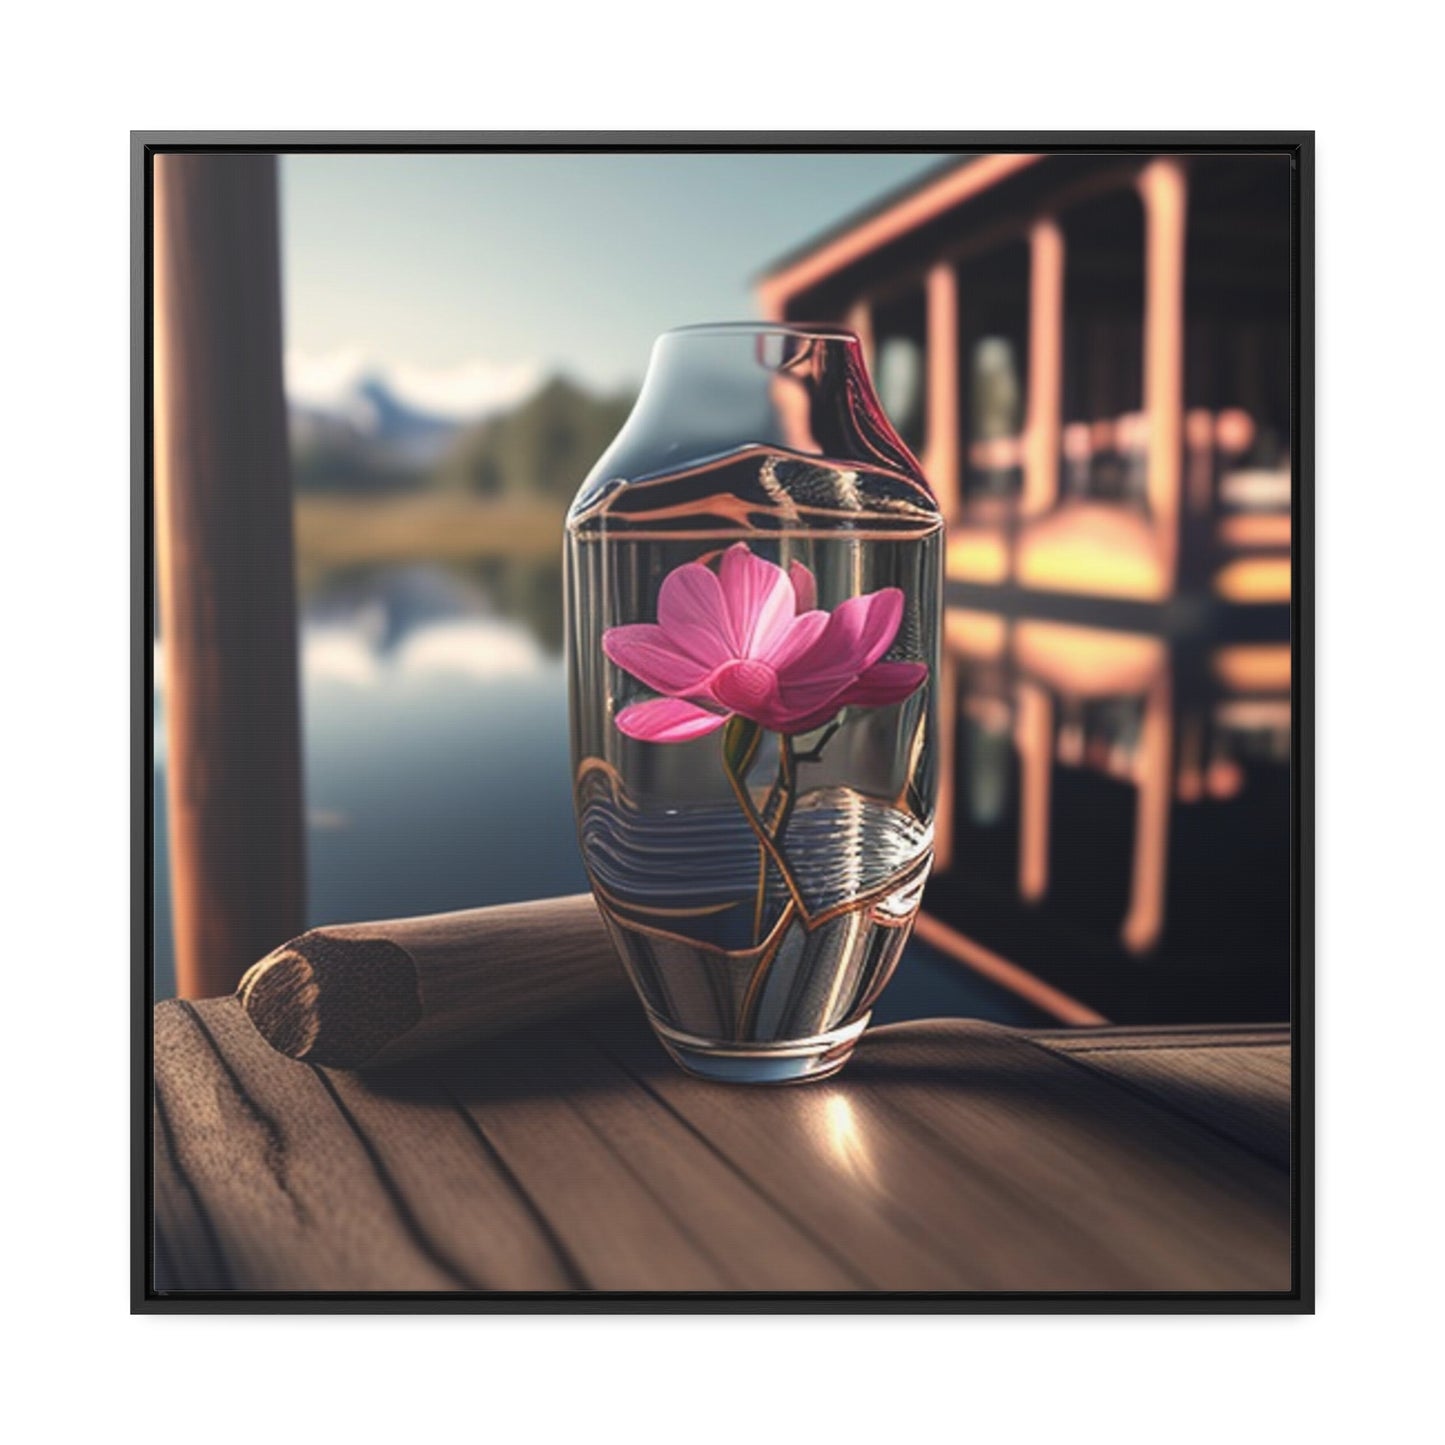 Gallery Canvas Wraps, Square Frame Magnolia in a Glass vase 3